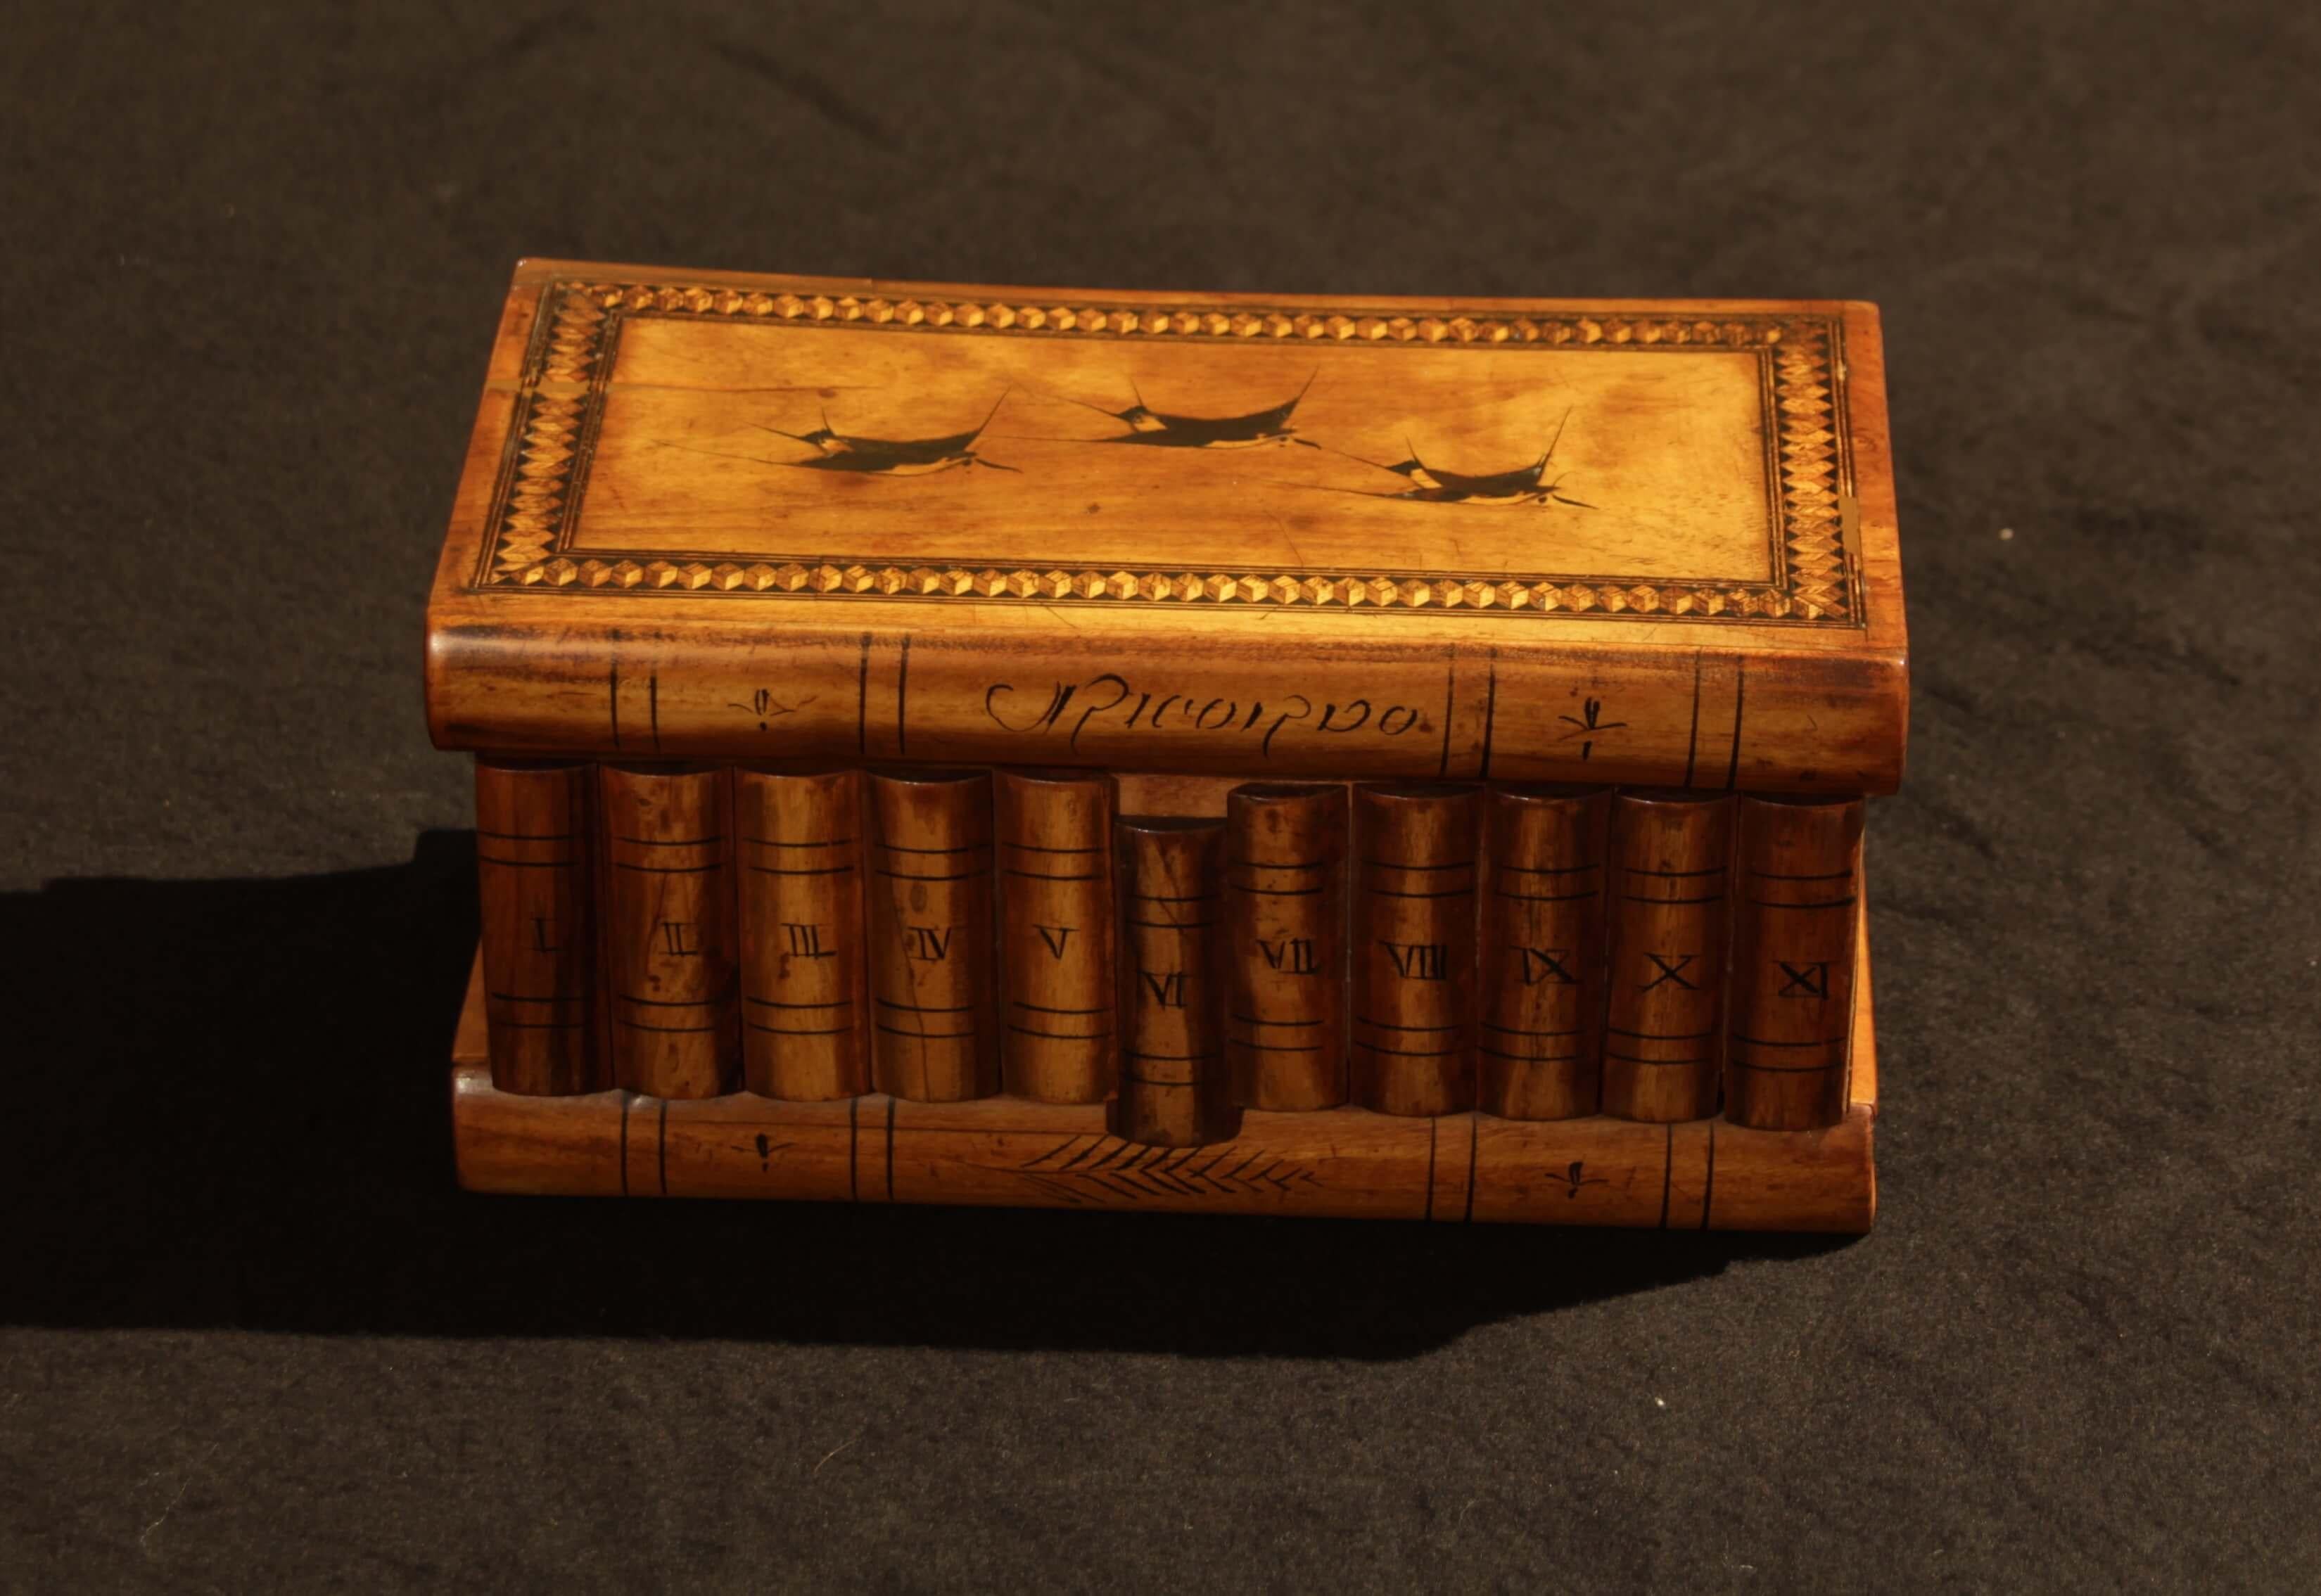 Lovely Italian jewelry casket box with Hidden compartment in the bottom.
Woods: Walnut with inlays of Ebony and Maple (French Polished).
The box is made to look like books from all sides.
There are three birds inlays and a wonderful dice frame